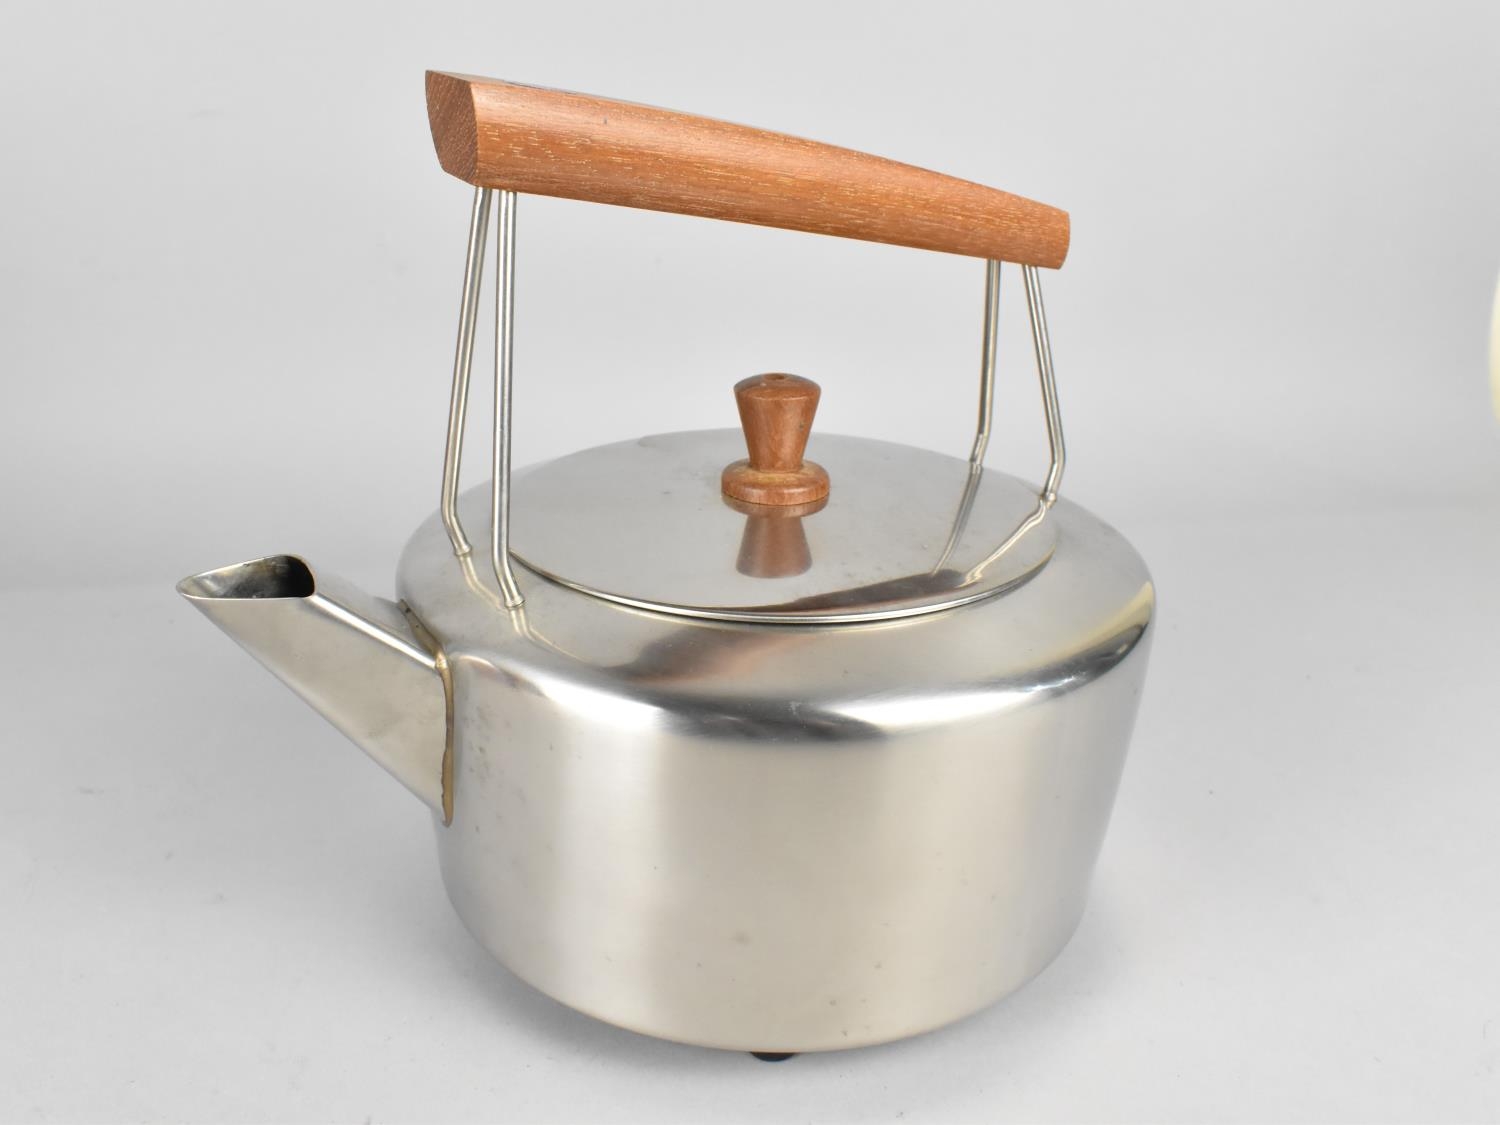 A c.1970s Stainless Steel Electric Kettle by Hoover, Model 6204, with Box - Image 2 of 4